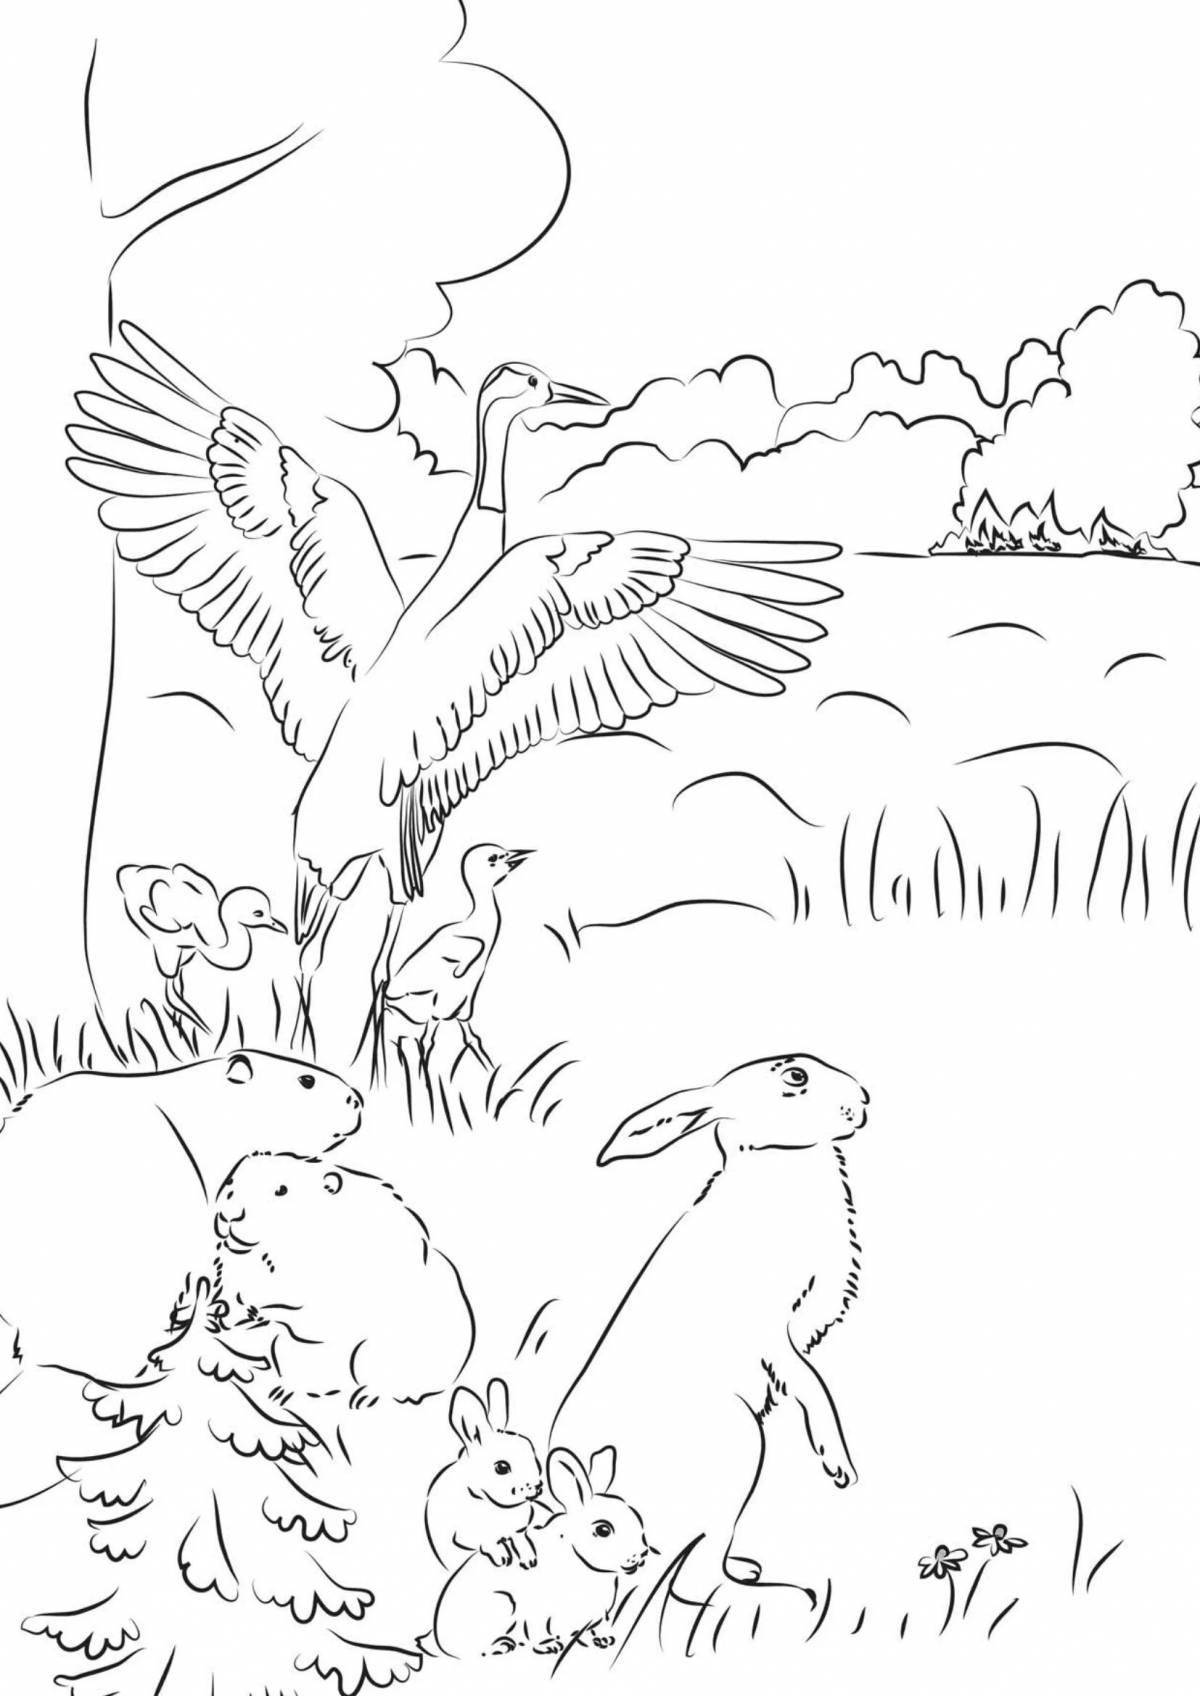 Large take care of the animals coloring page